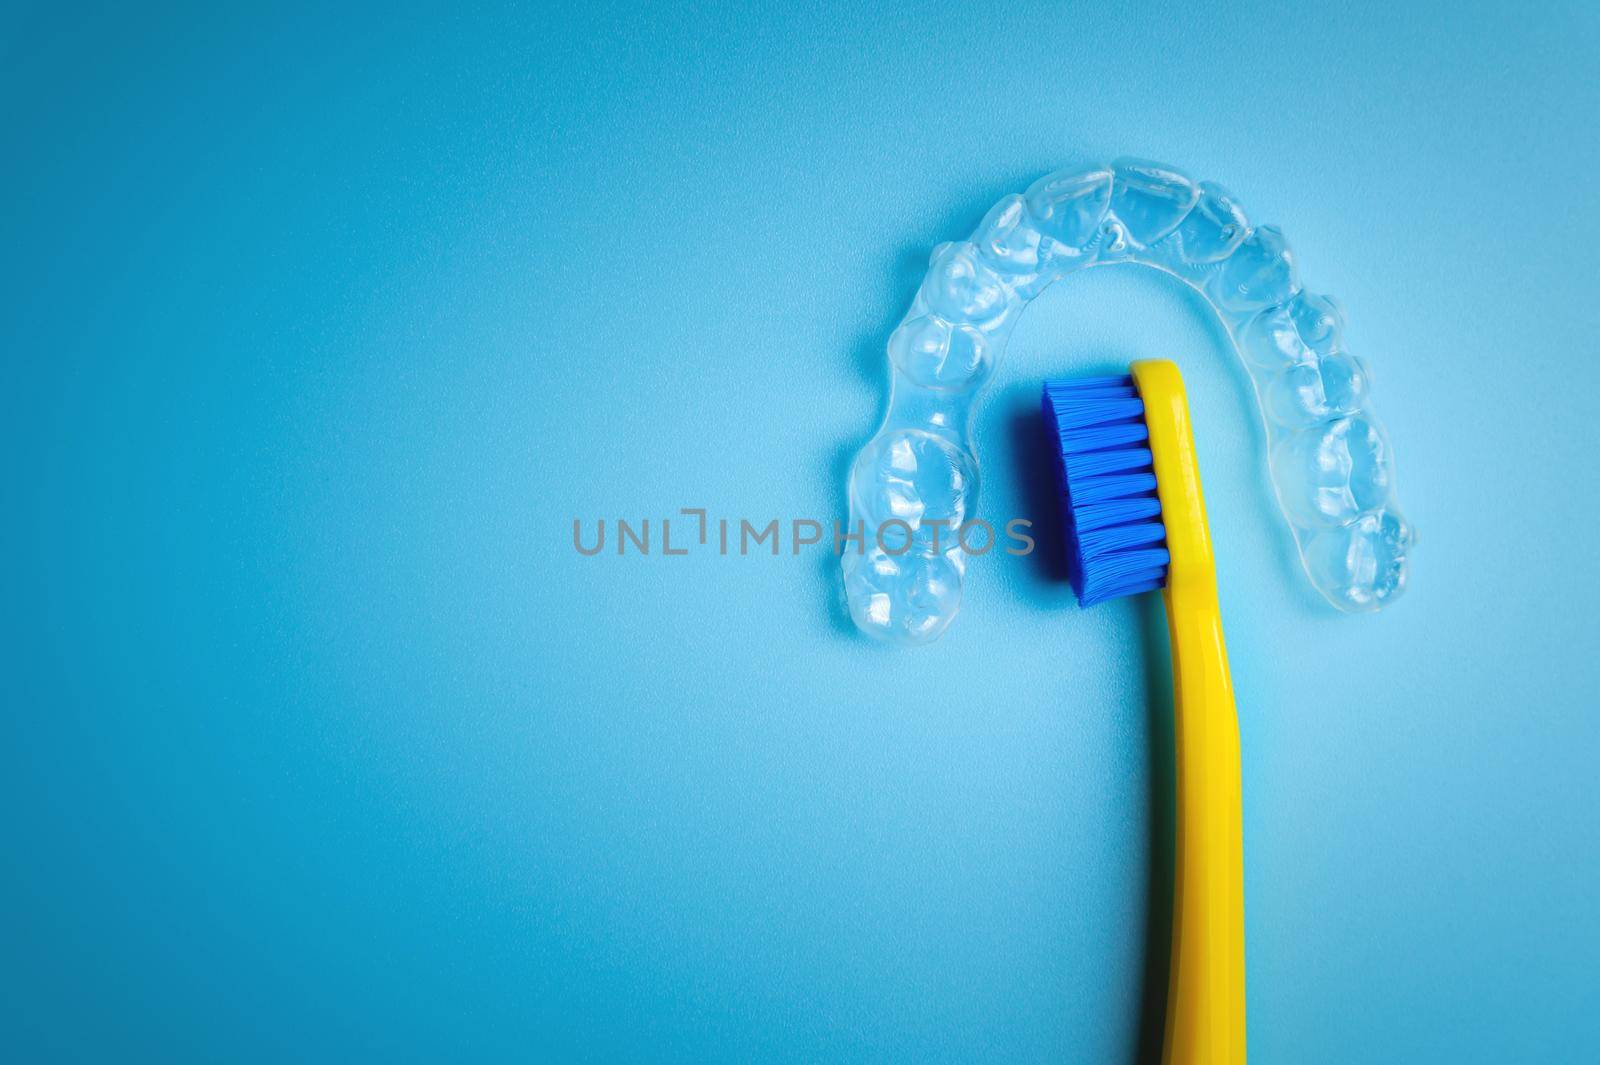 An invisible plastic aligner for correcting teeth to straighten teeth lies on a blue background with a toothbrush.